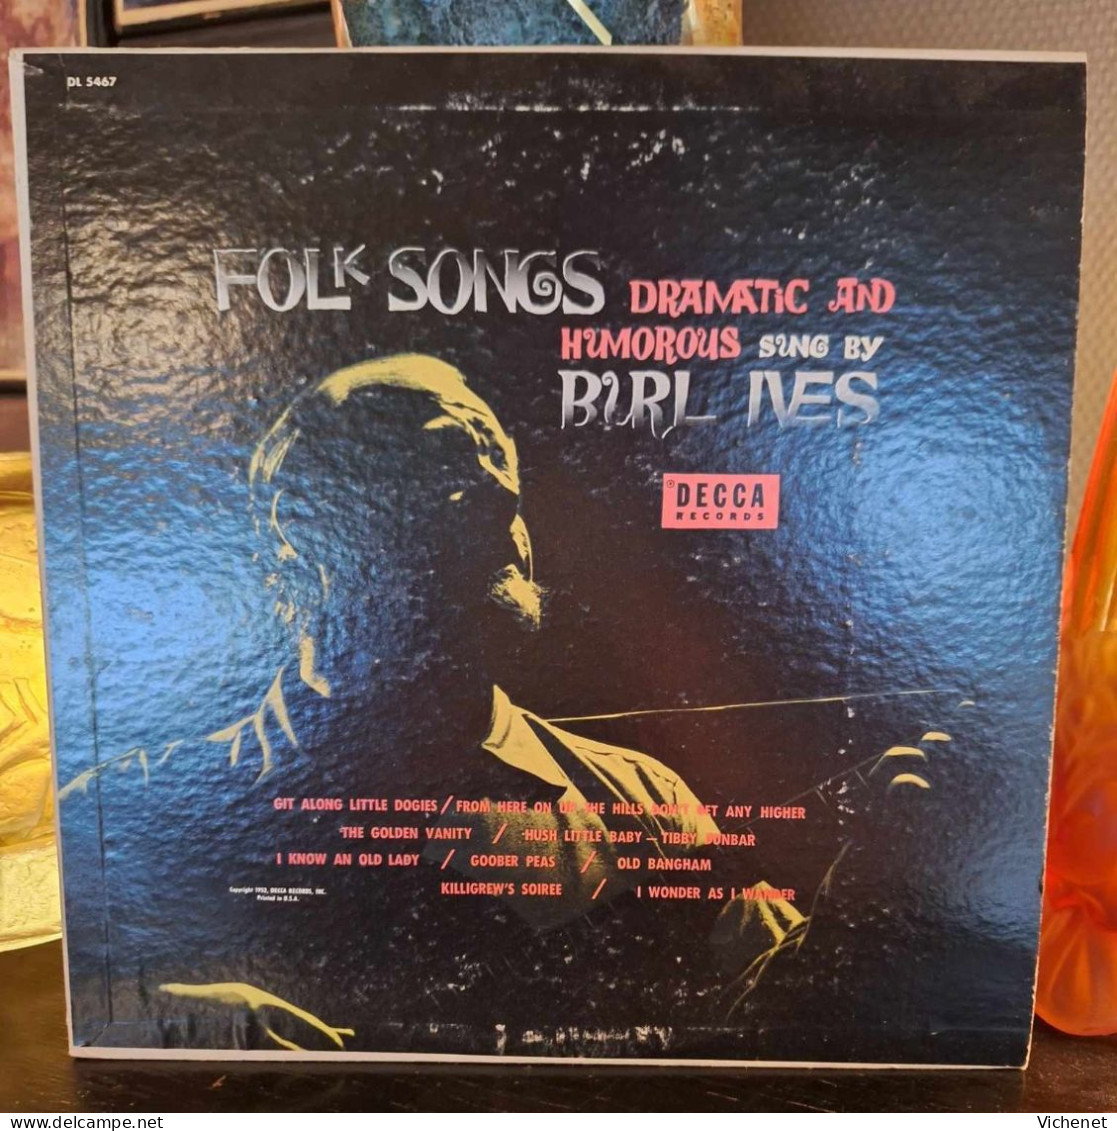 Burl Ives - Folk Songs - Dramatic And Humorous - 25 Cm - Formati Speciali